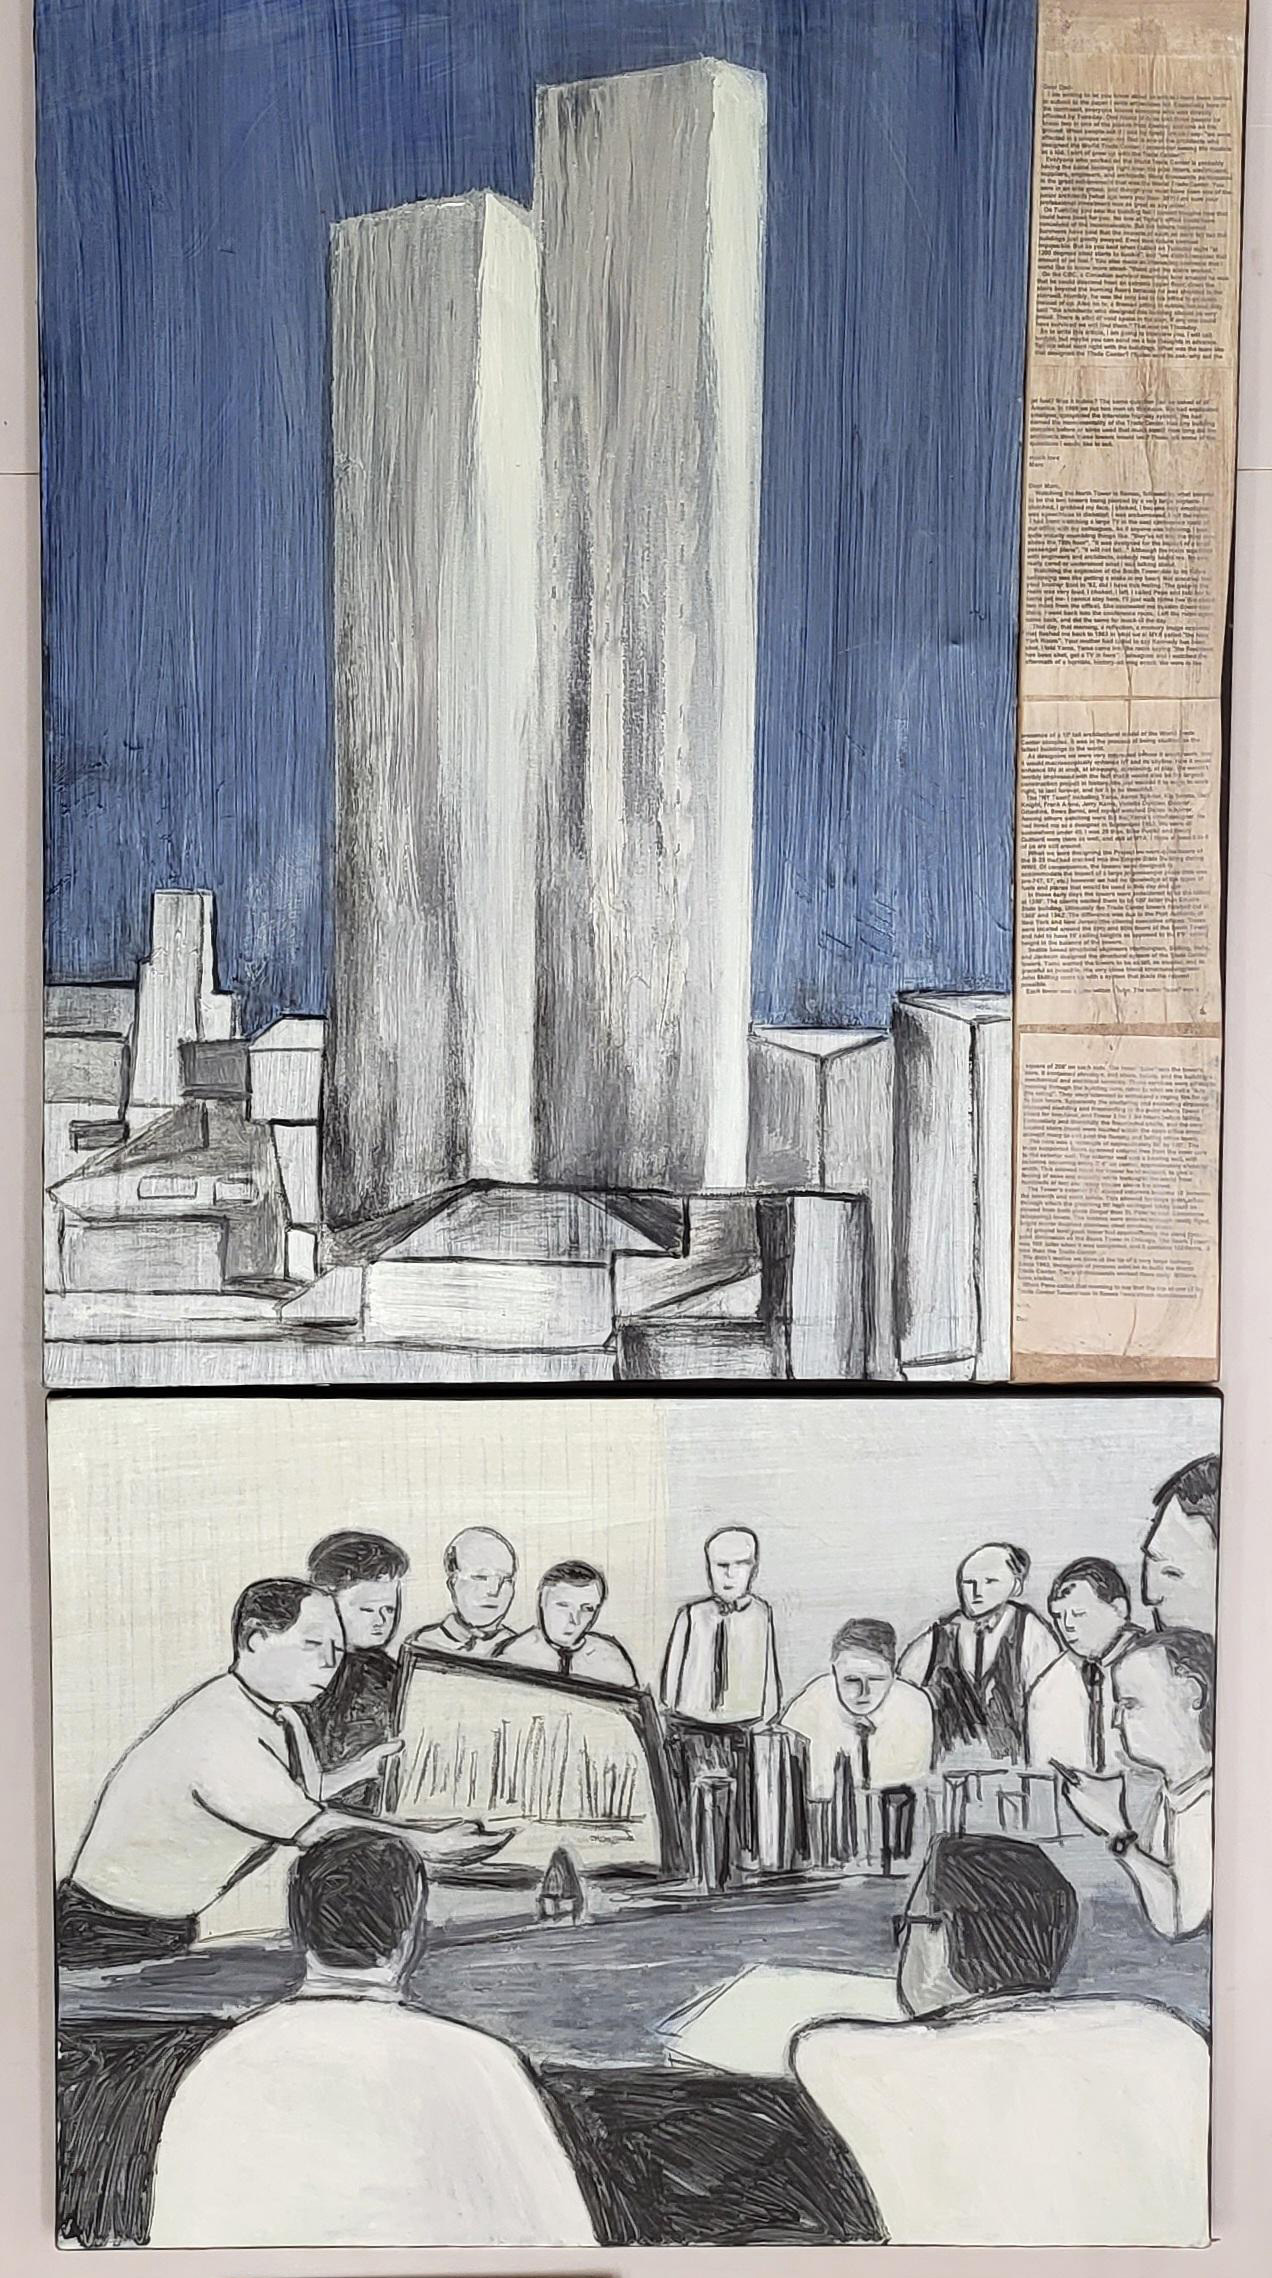 Diptych painting showing the original World Trade Center (top) and its planning 